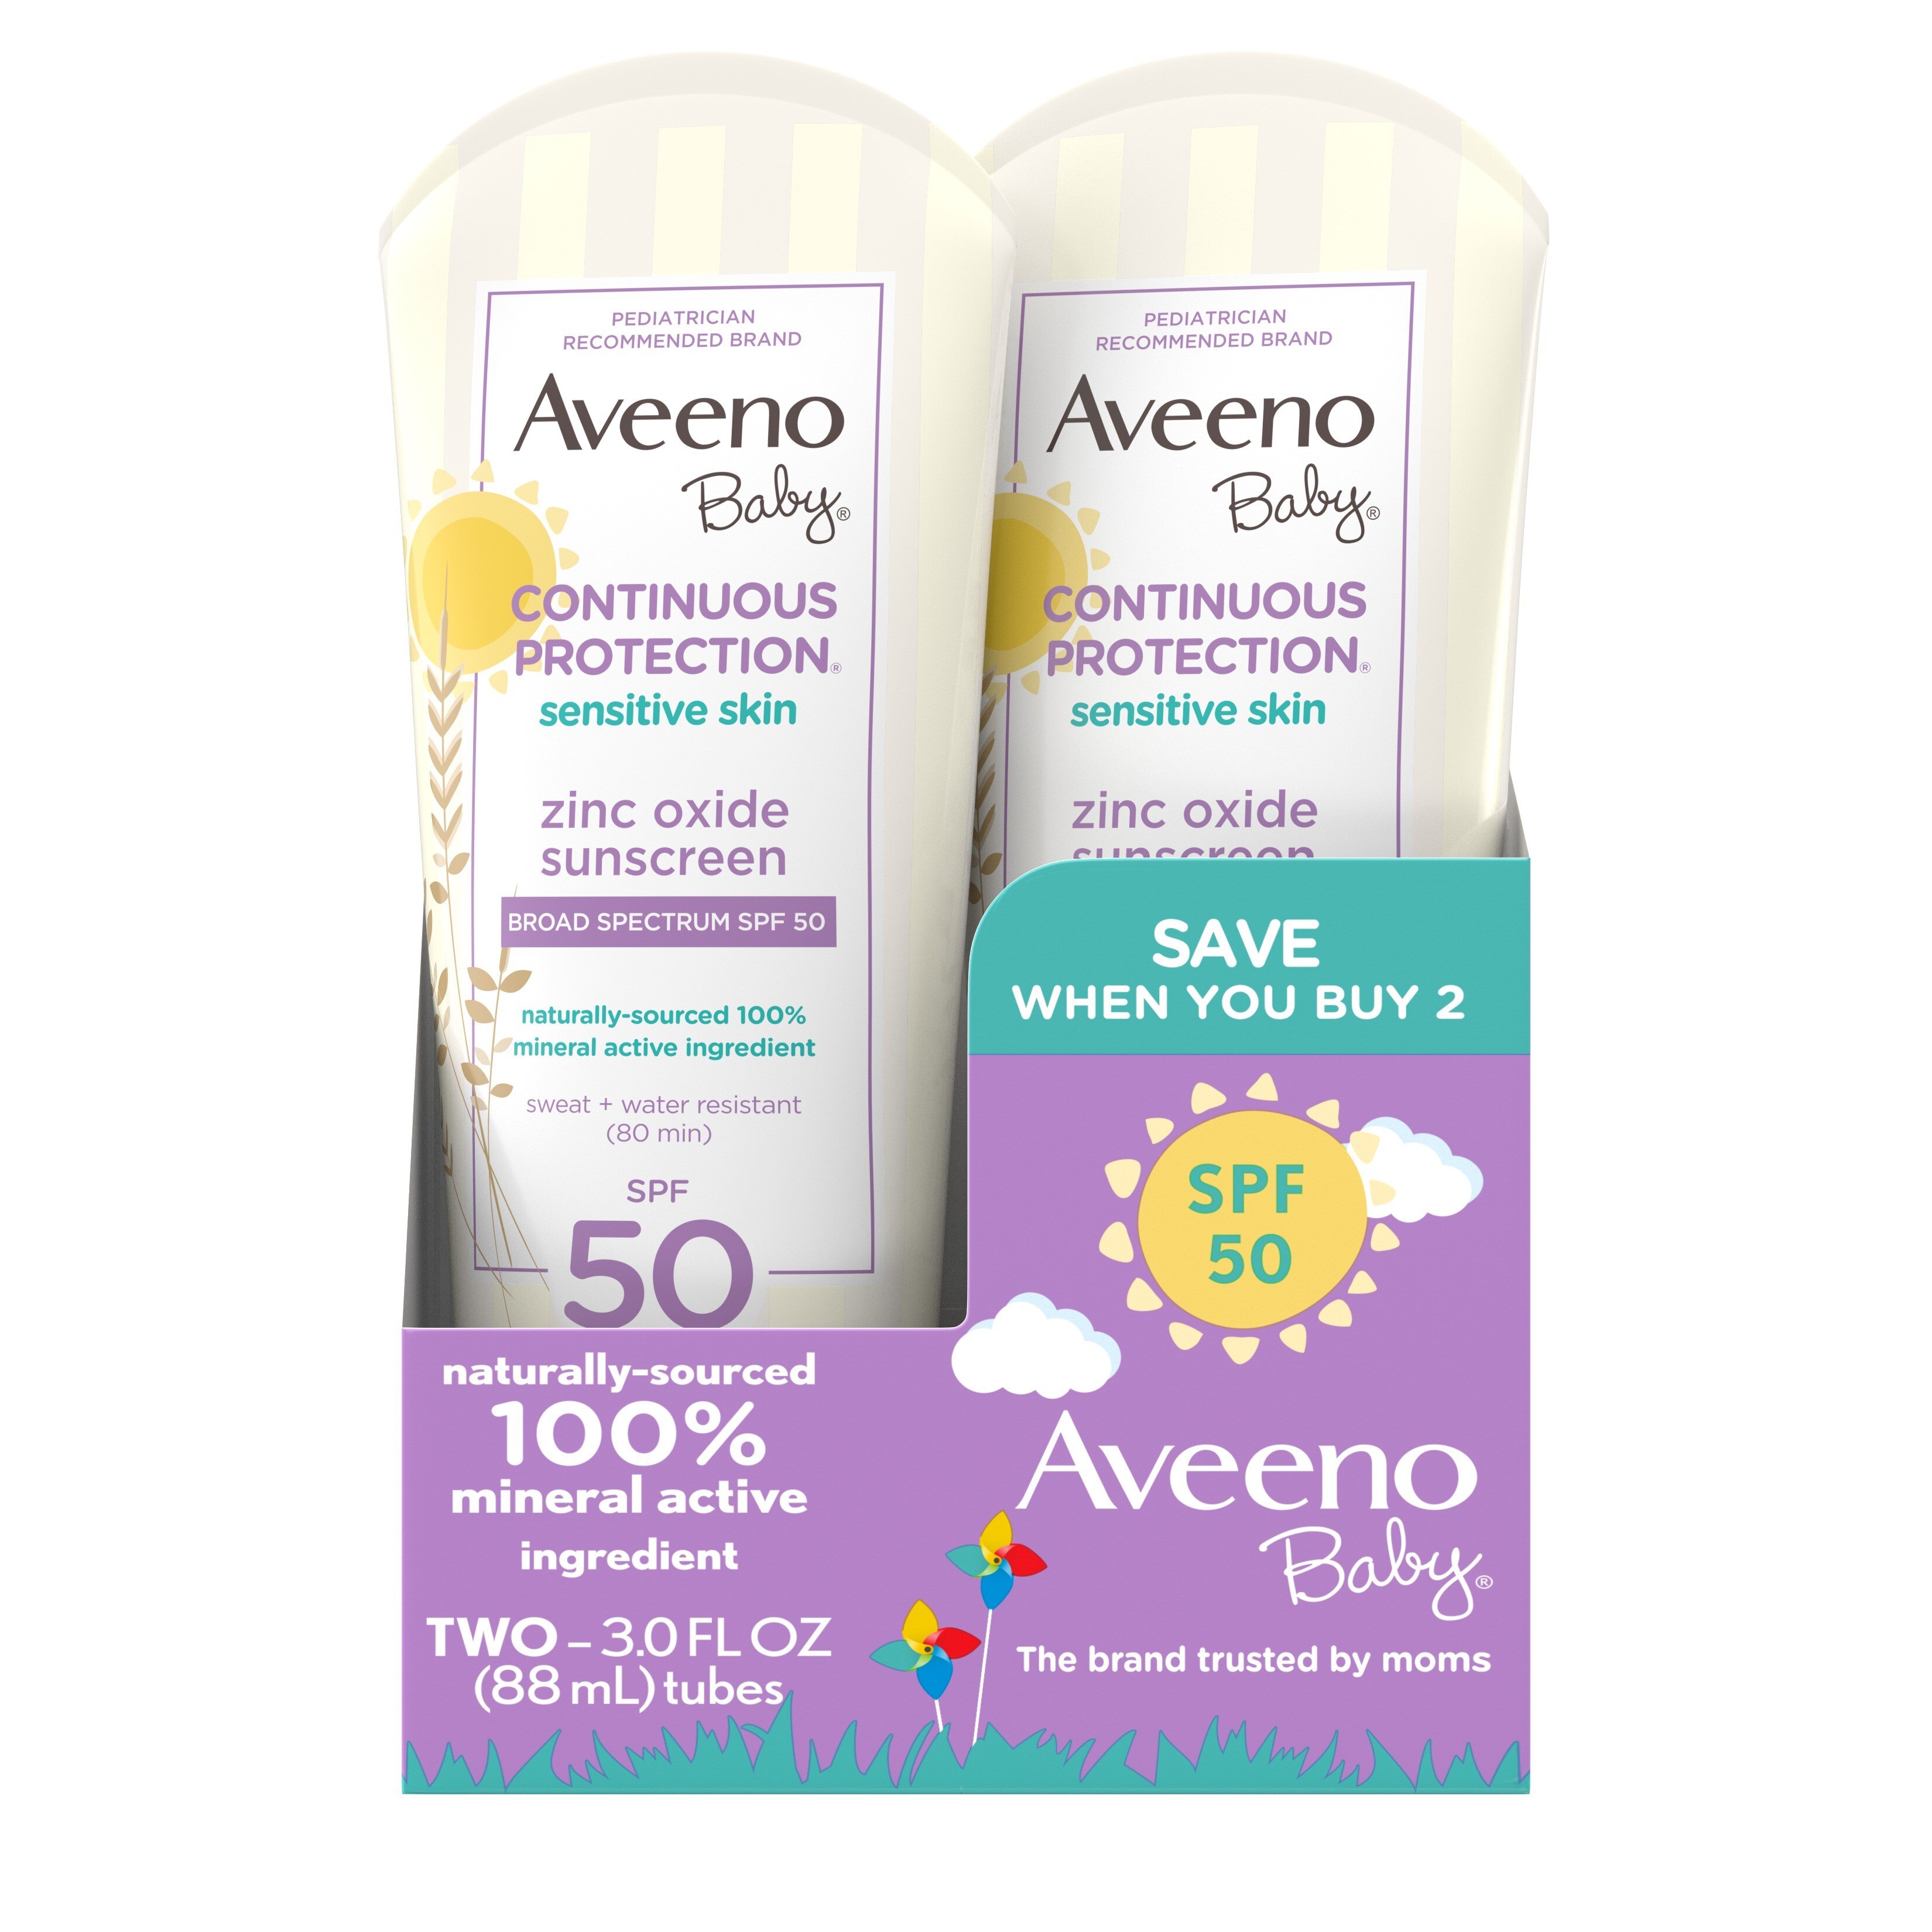 Aveeno Baby Continuous Protection Sunscreen, SPF 50, 2 x 3 fl. oz